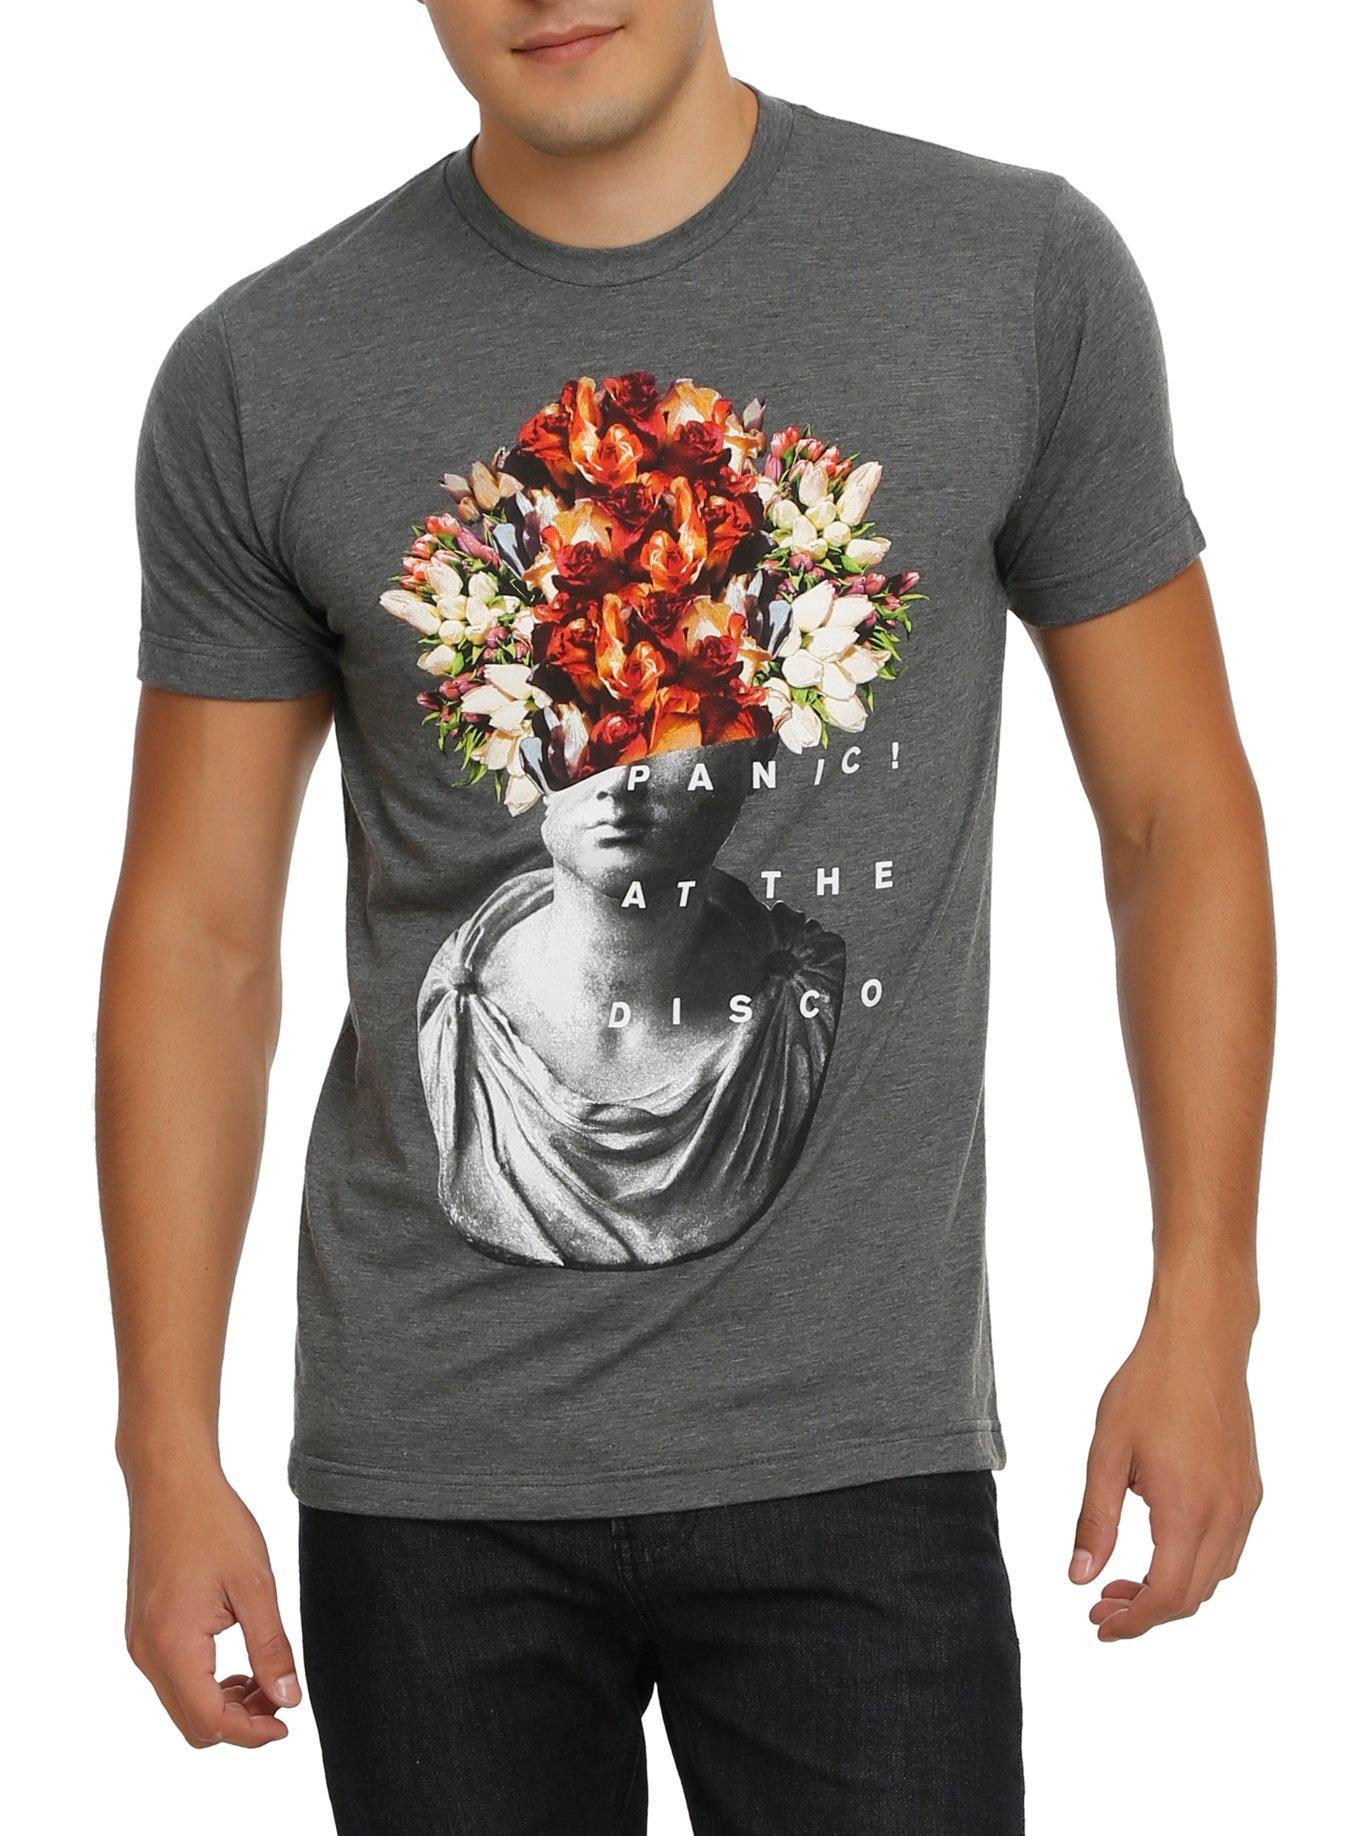 Panic! At The Disco Flower Head T-Shirt, HEATHER GREY, hi-res